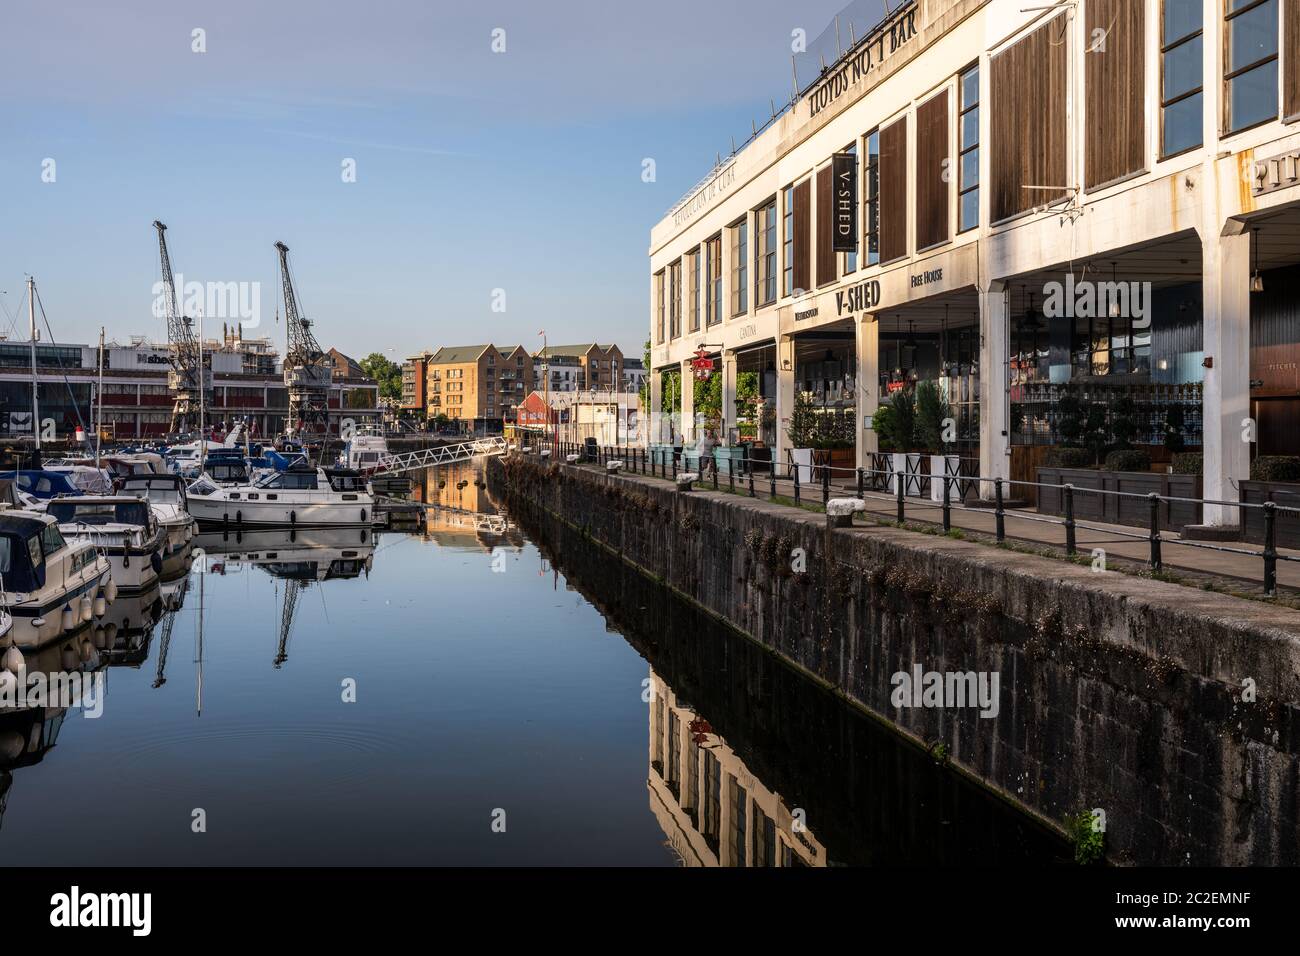 Joggers run on Bristol's Harbourside beside V Shed, one of several historic transit shed warehouses converted into bars and restaurants. Stock Photo